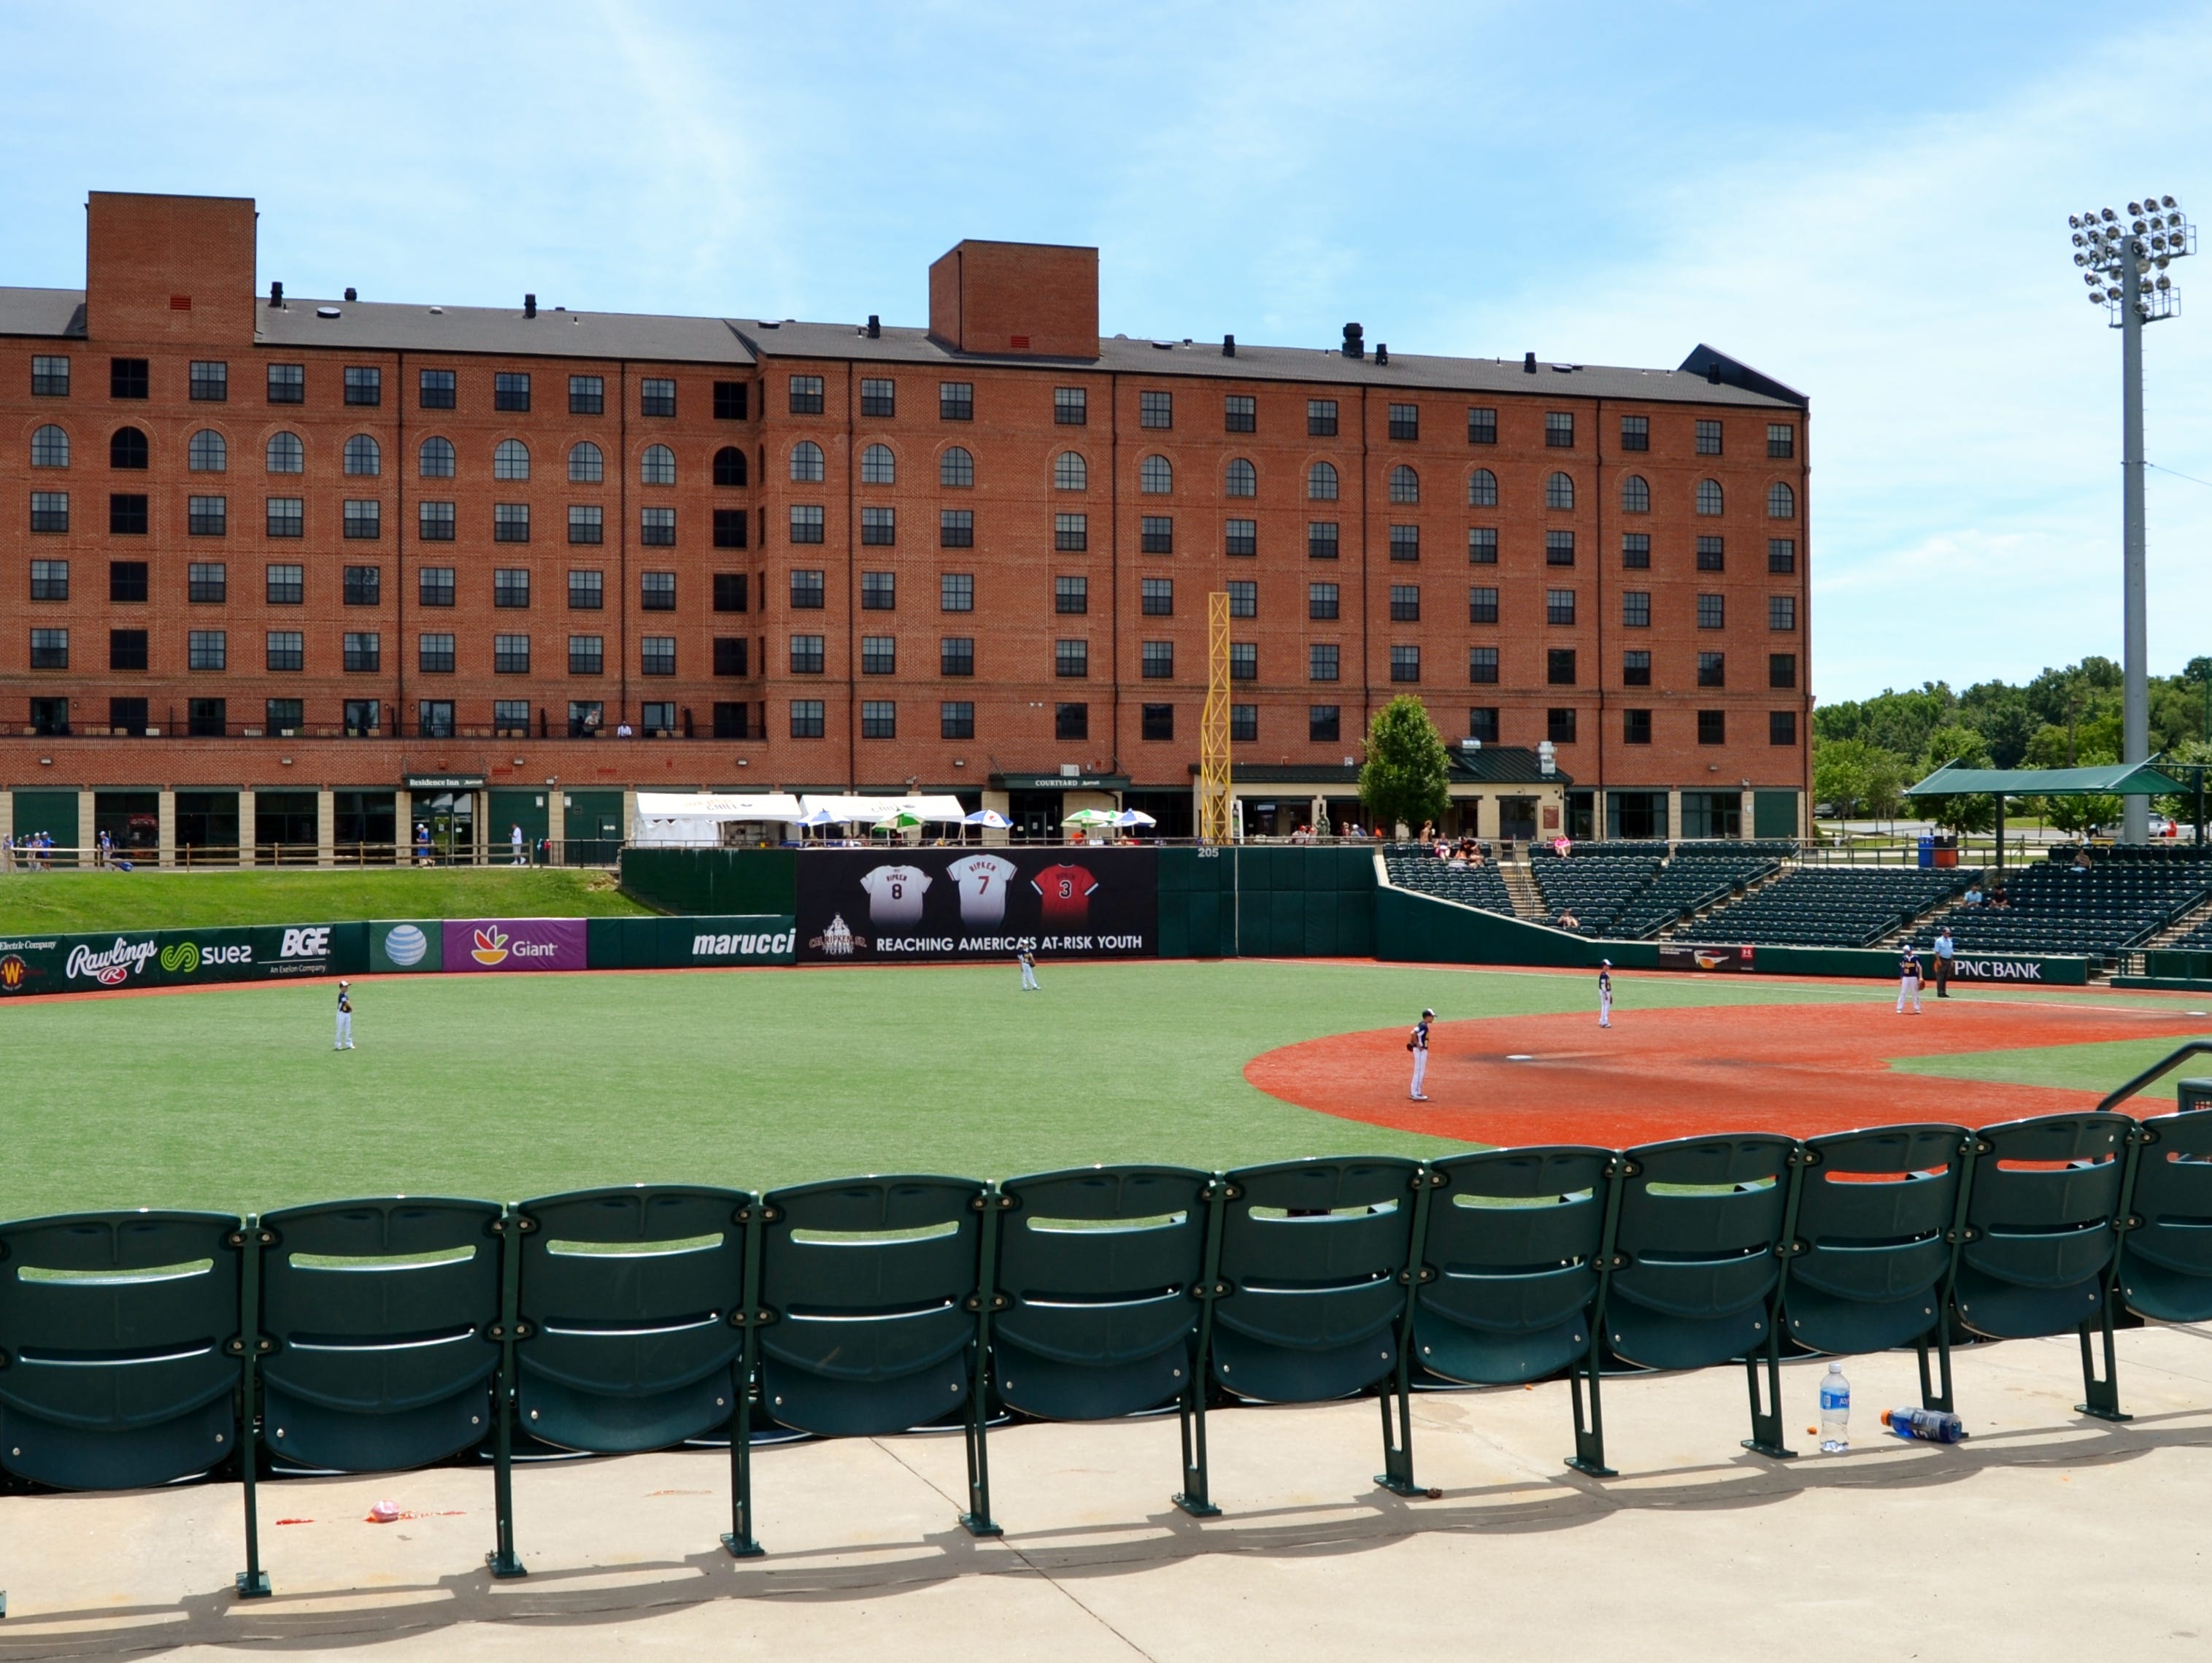 If you plan to stay onsite for a tournament at the Ripken Baseball complex in Aberdeen, Md., plan on spending at least $250 a night.